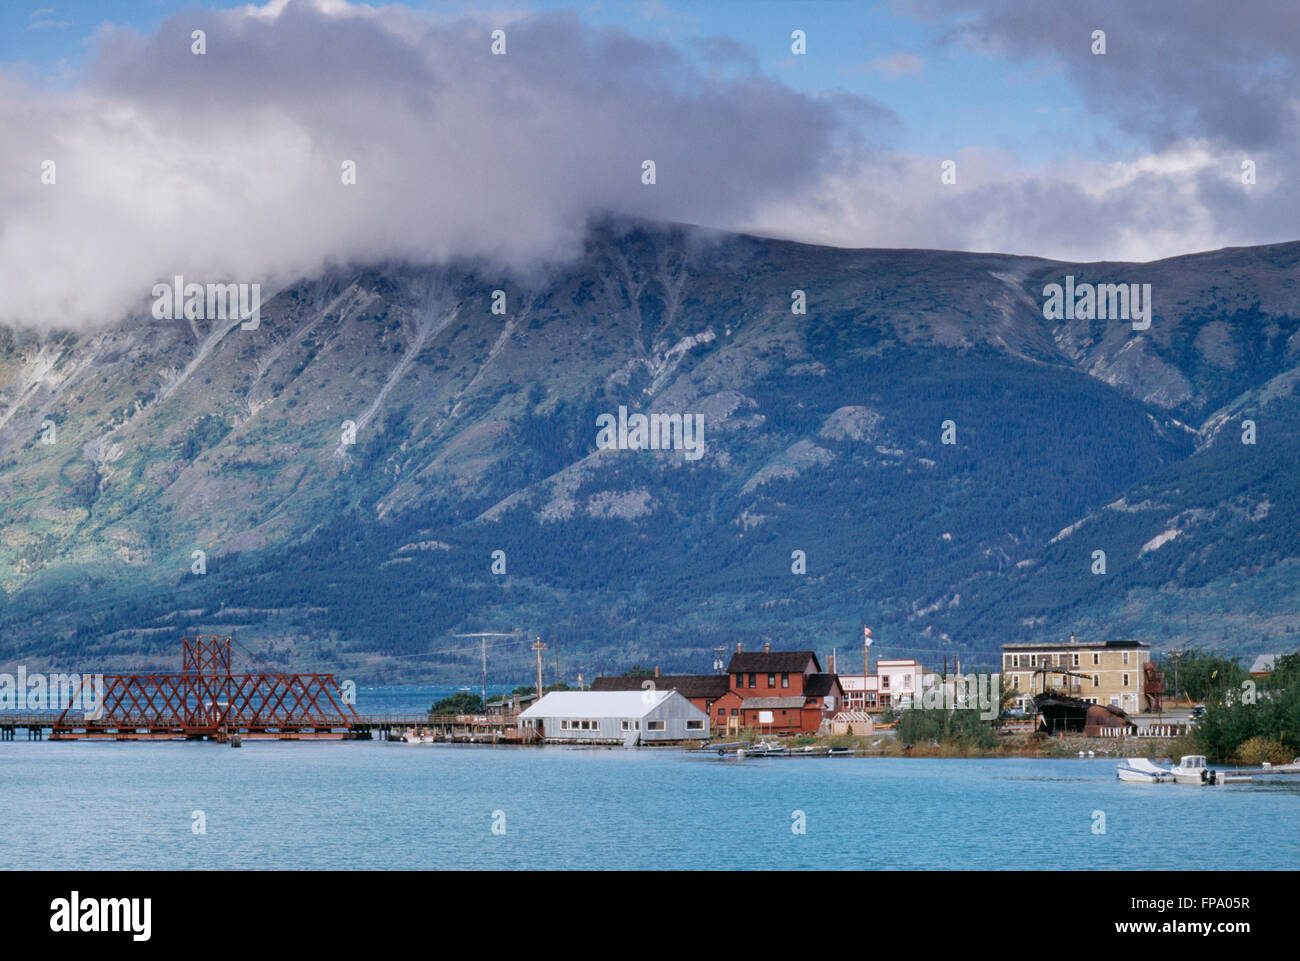 View of Carcross, Nares Lake and Mountains, Yukon Territory, Canada Stock Photo